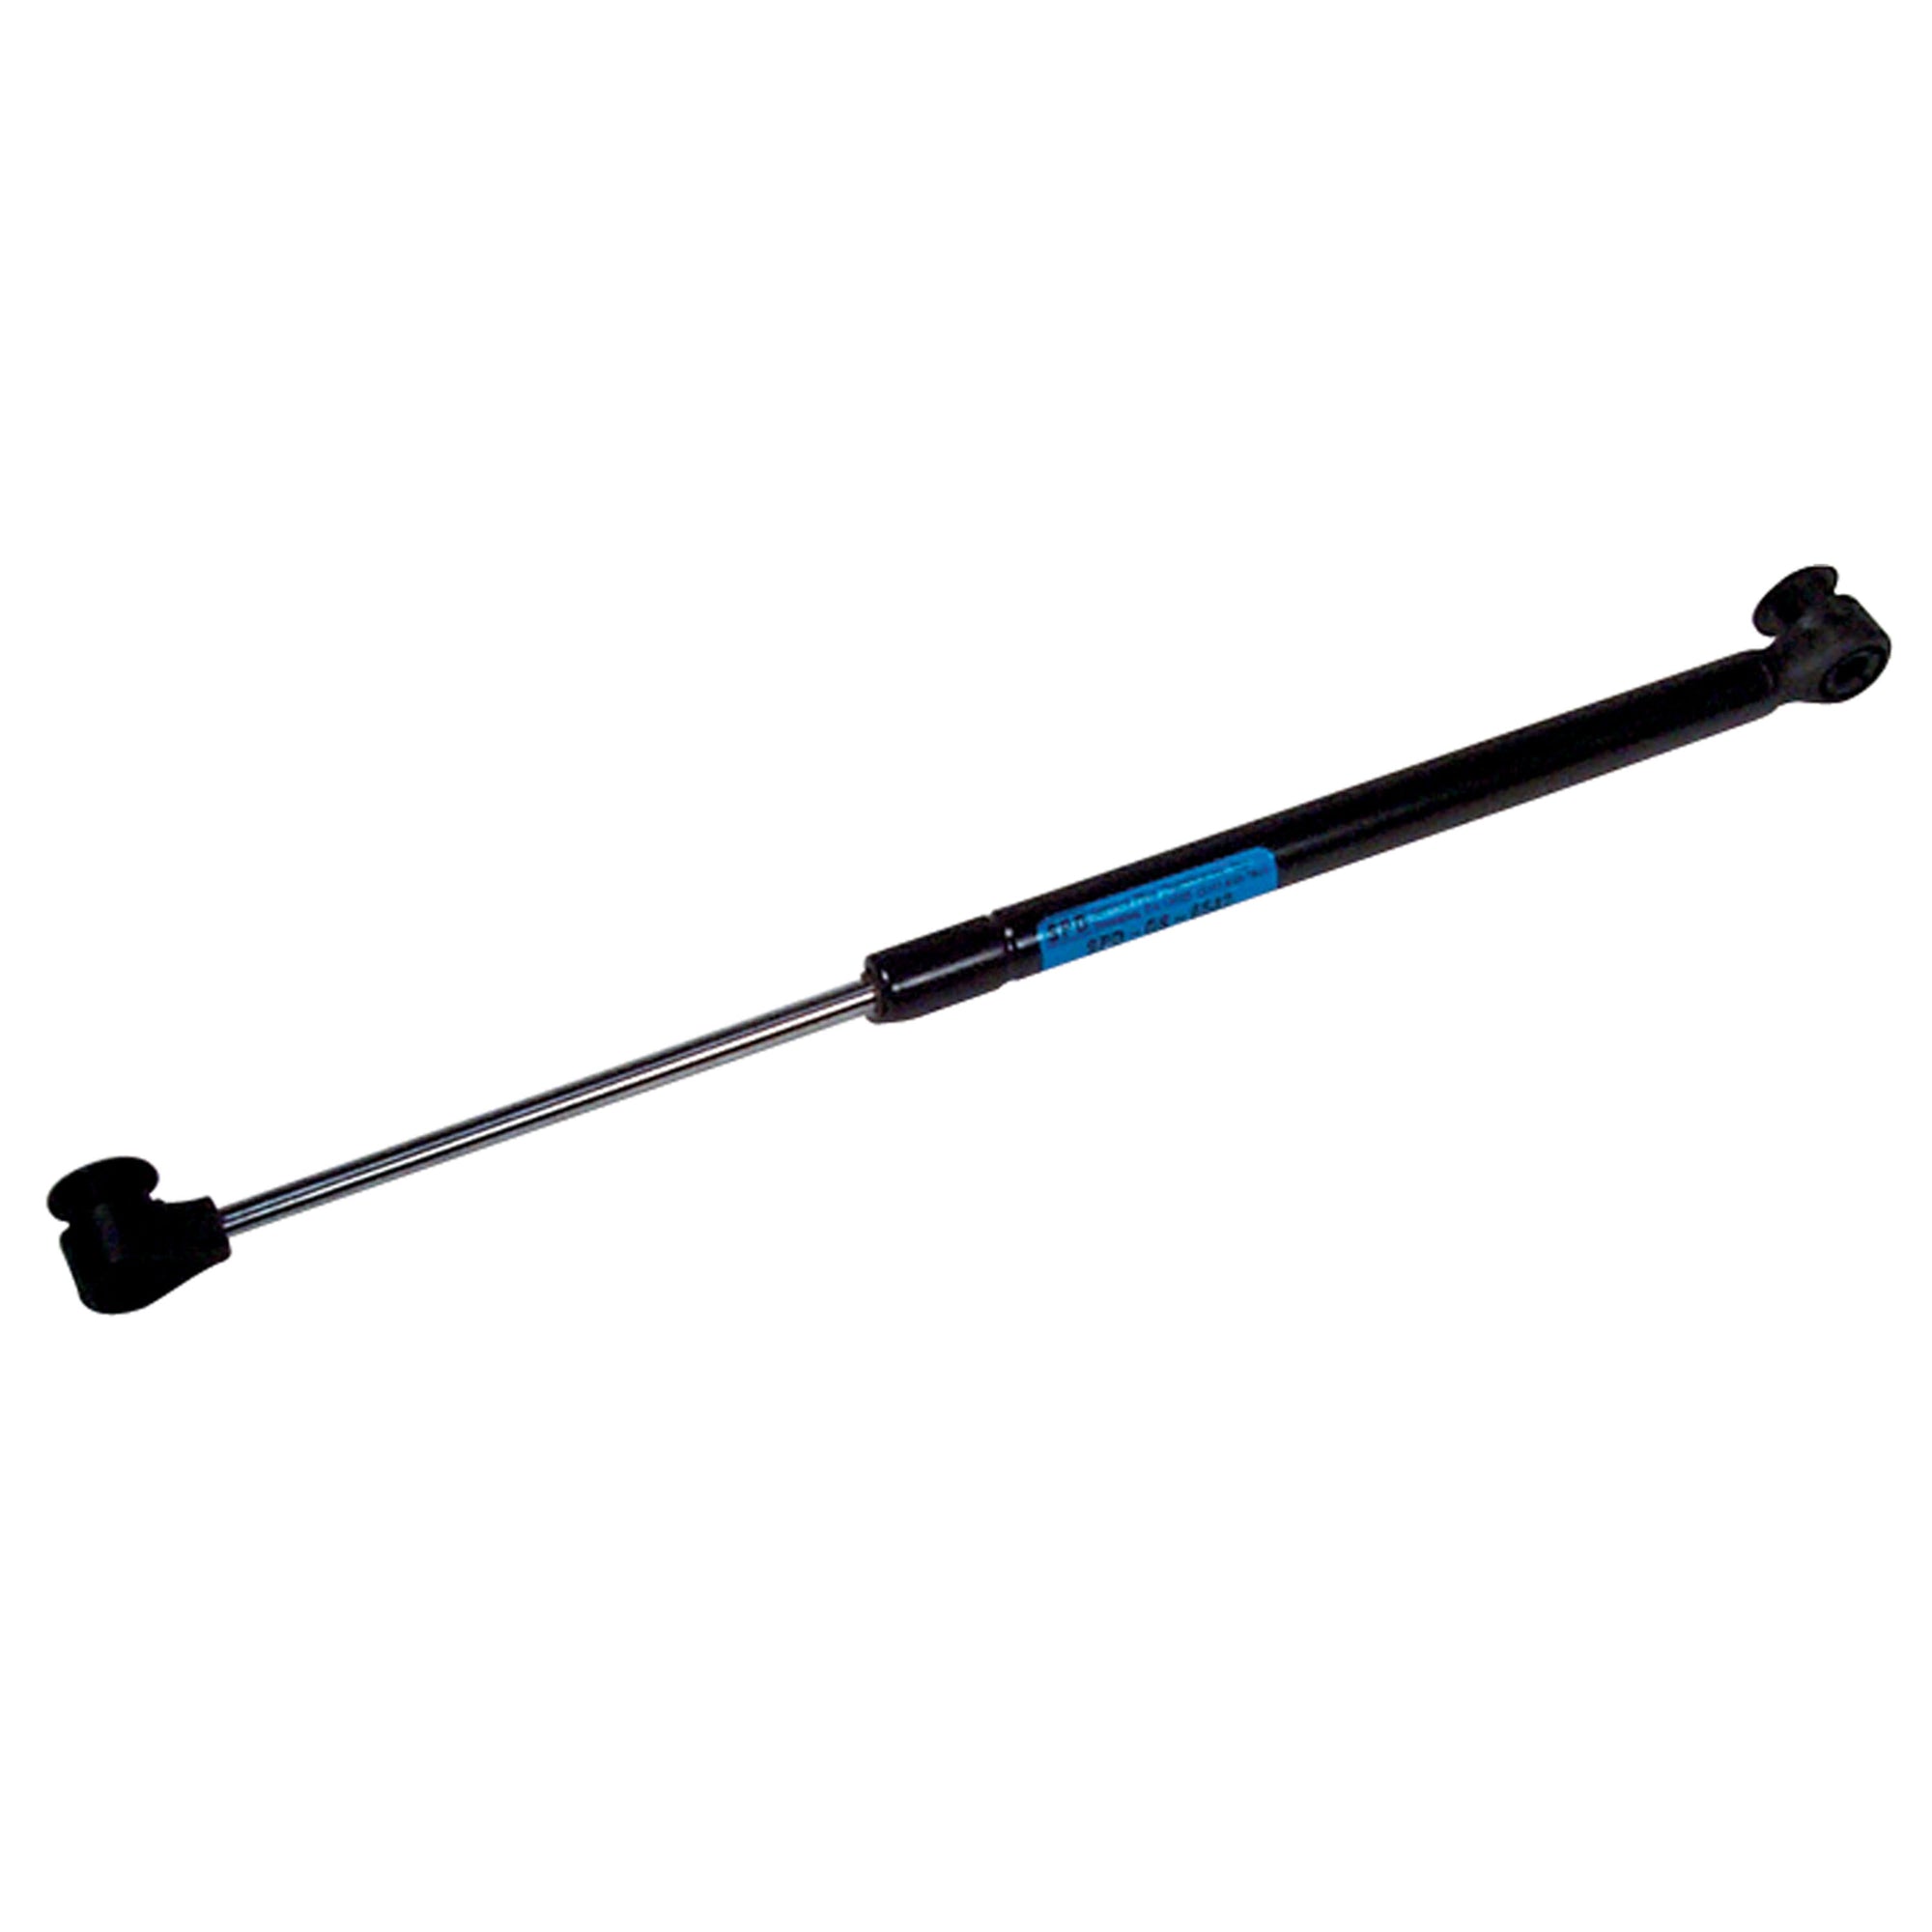 AP Products 010-175 Gas Spring - 12.20" Ext Length, 3.94" Stroke Rod Length, 30 lb. P1 Force